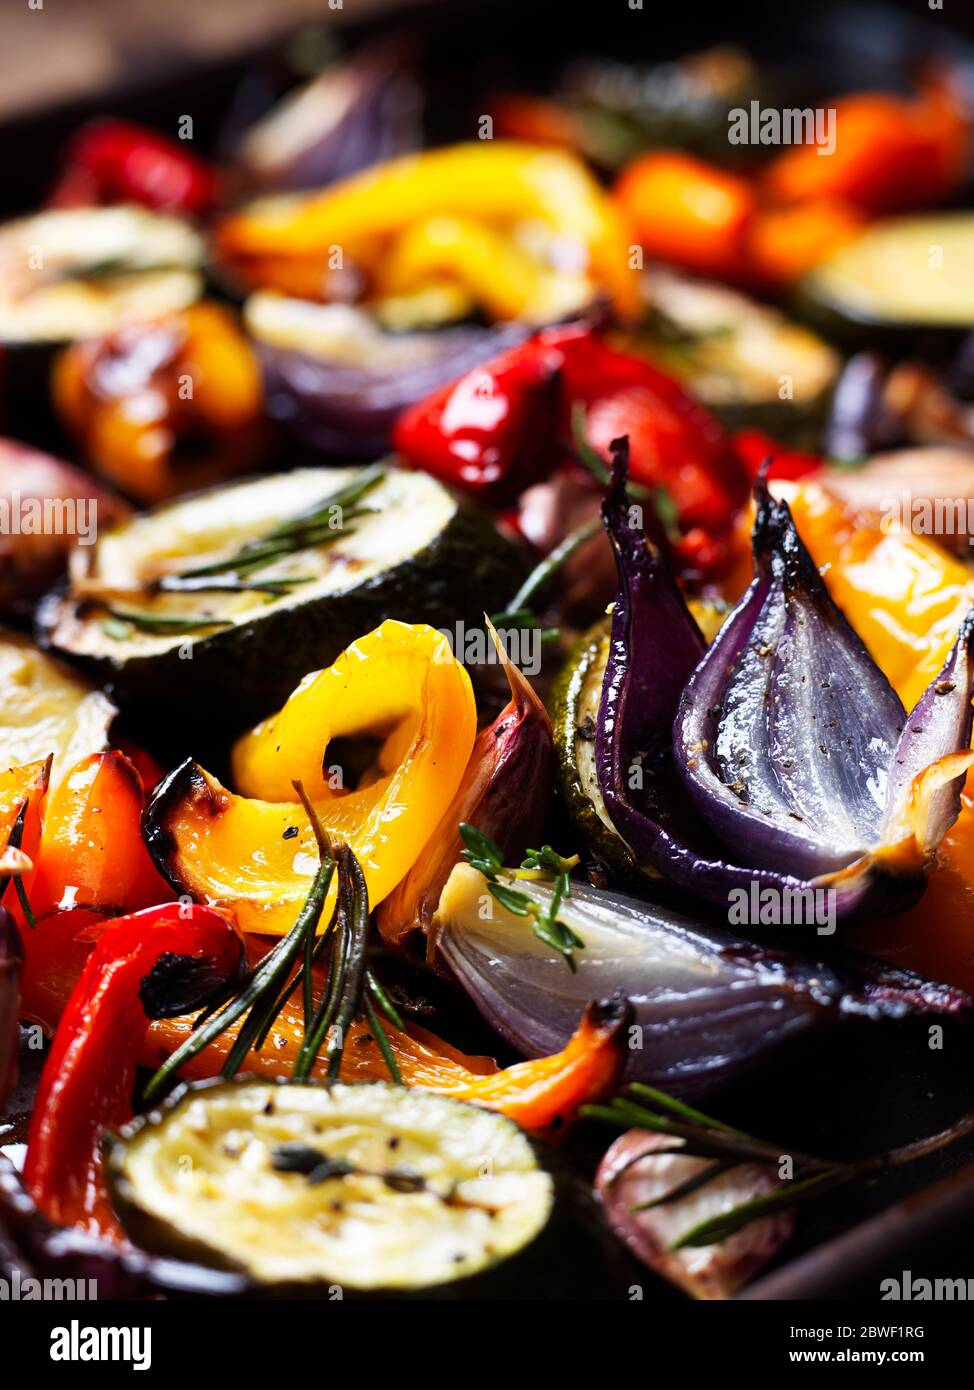 Oven Roasted Vegetables With Thyme and Rosemary Stock Photo